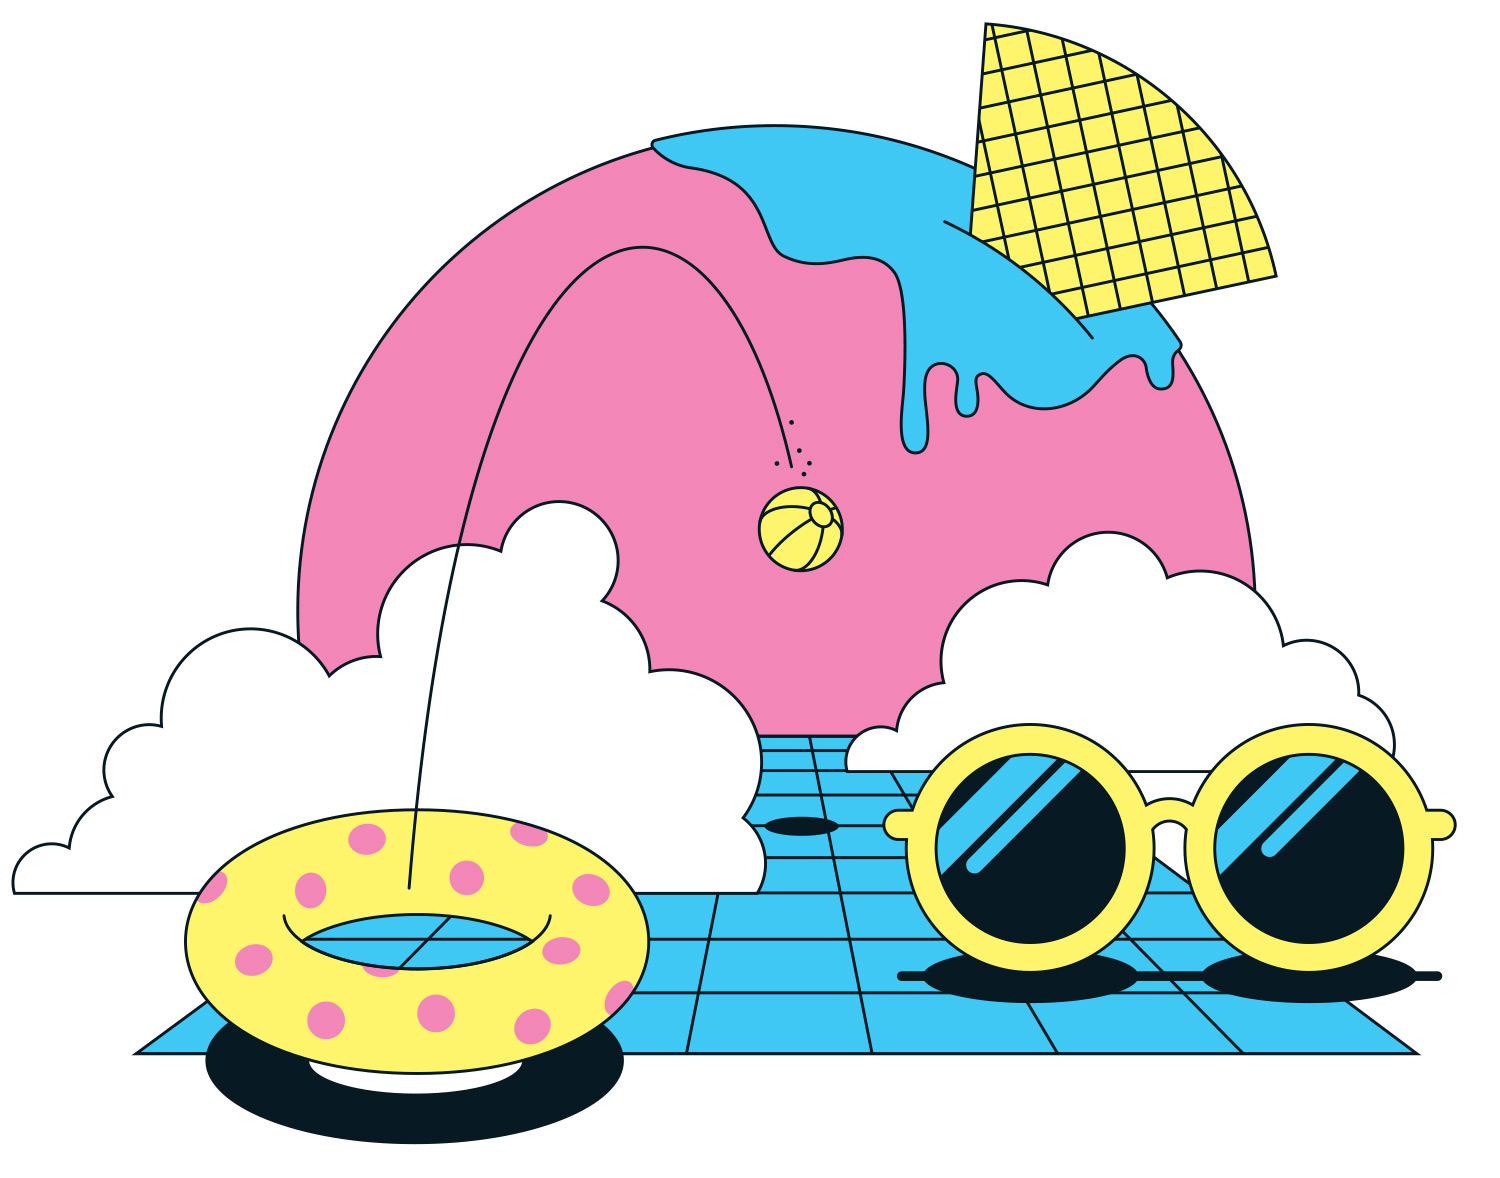 Abstract scene with sunglasses and ice cream in retro style. Illustration by Axel Pfaender for Deutsche Bahn.